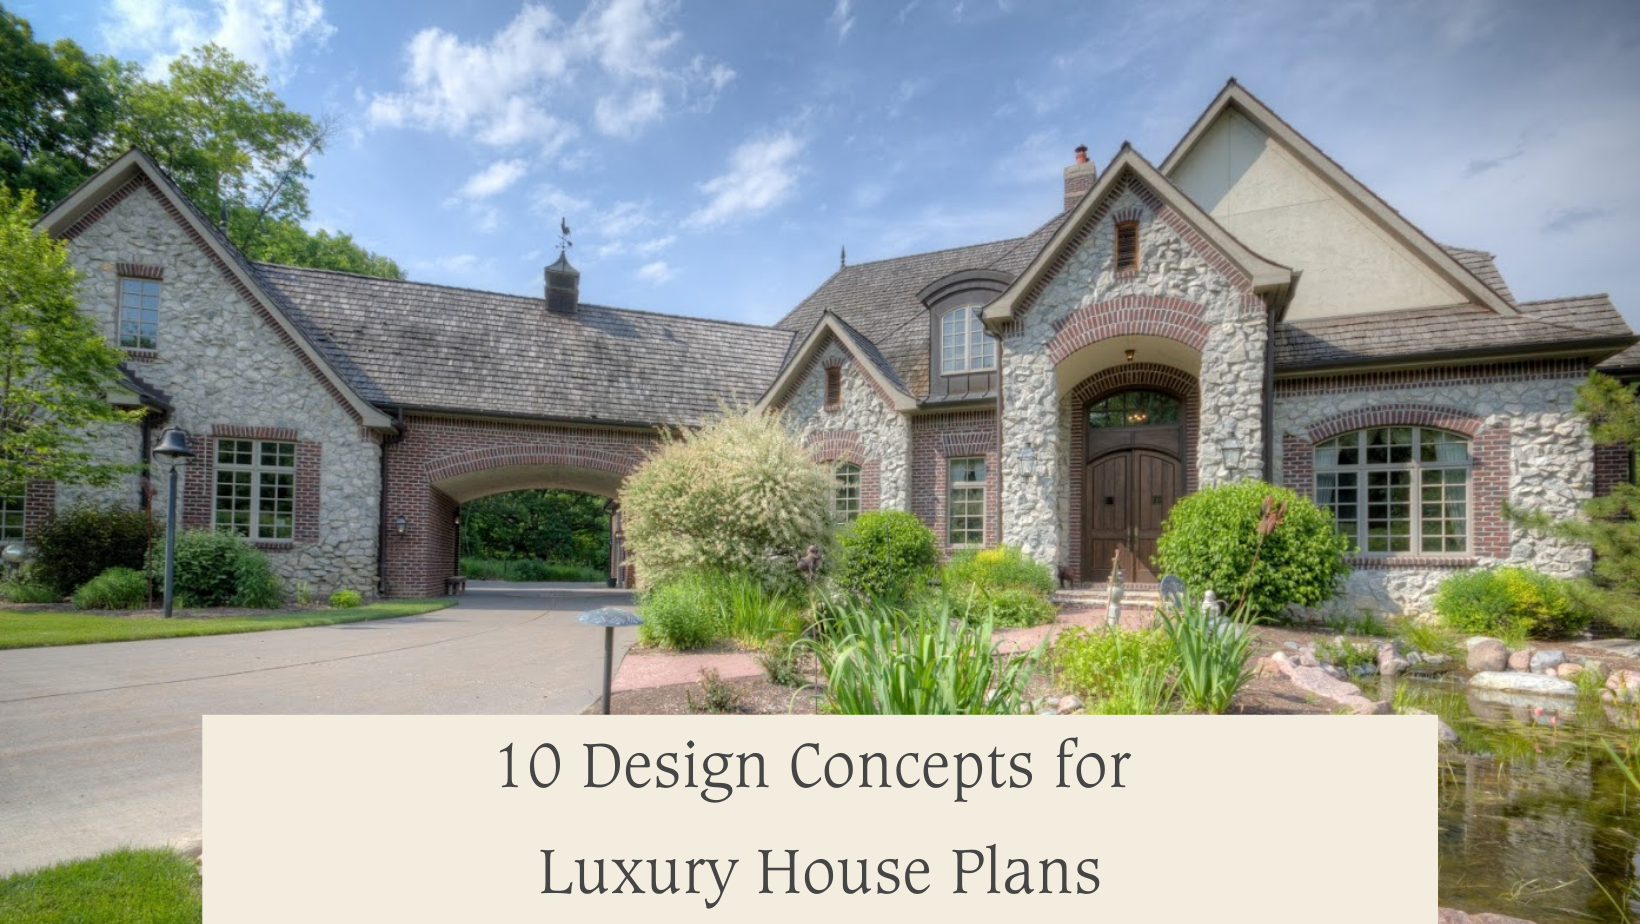 10 Design Concepts for Luxury House Plans